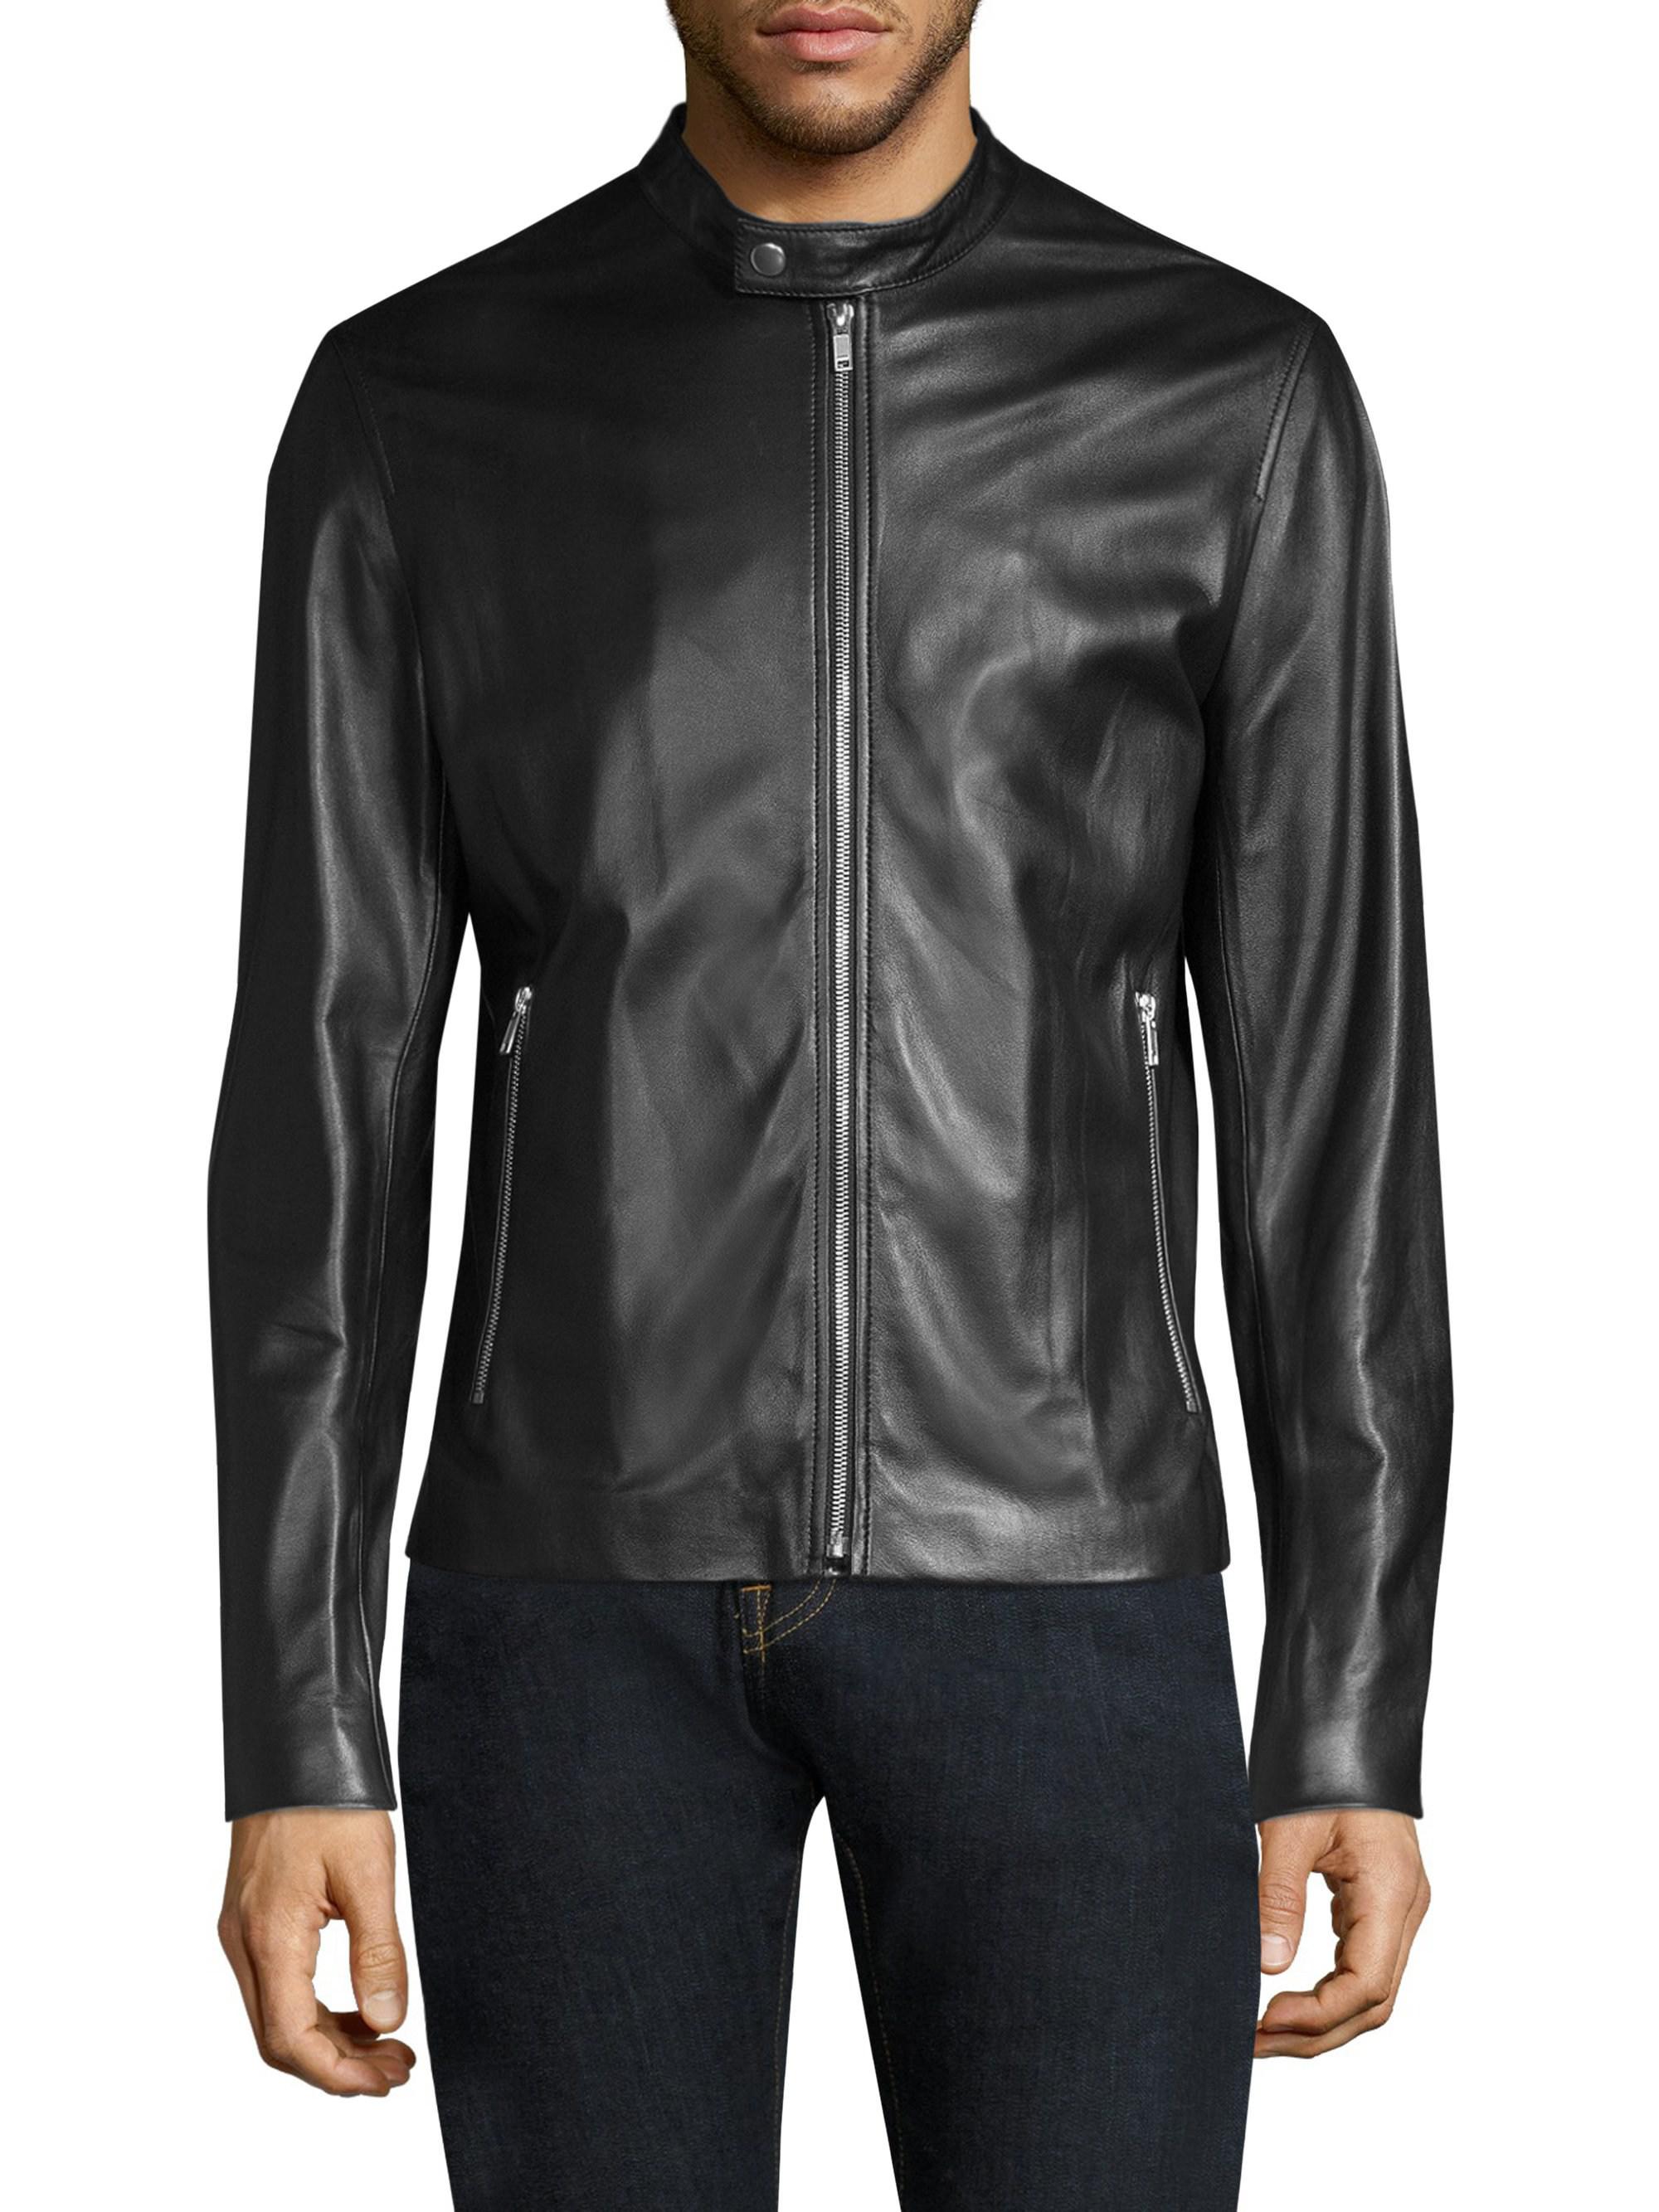 Lyst - Theory Benji Wynwood Leather Jacket in Black for Men